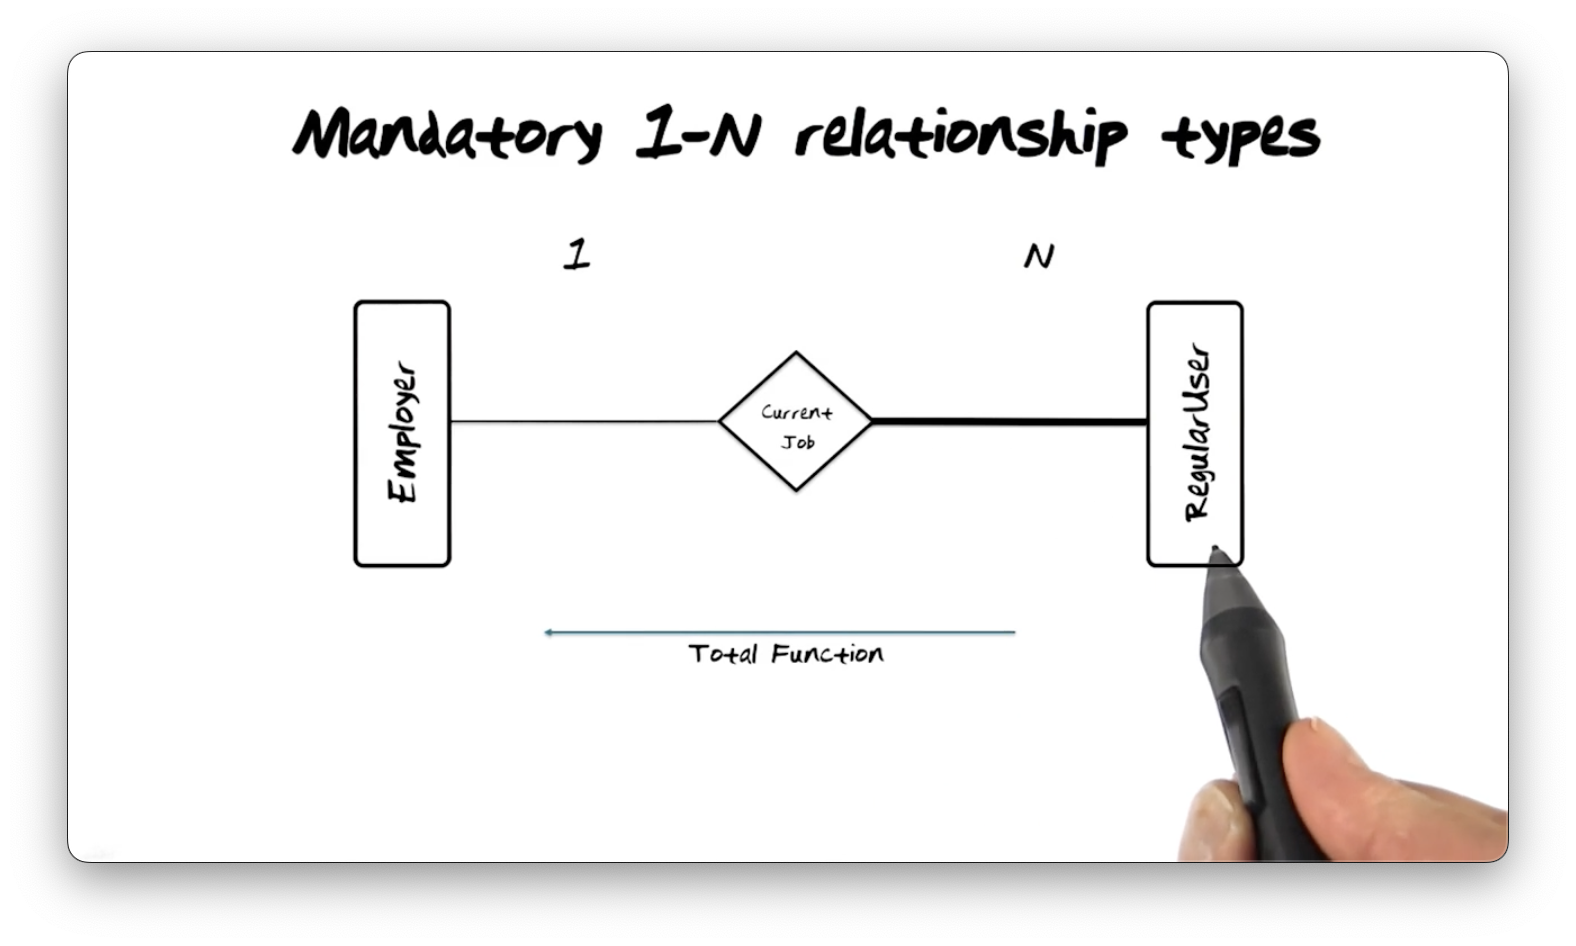 A mandatory 1-many relationship type between the employer entity type and the
regular user entity type.